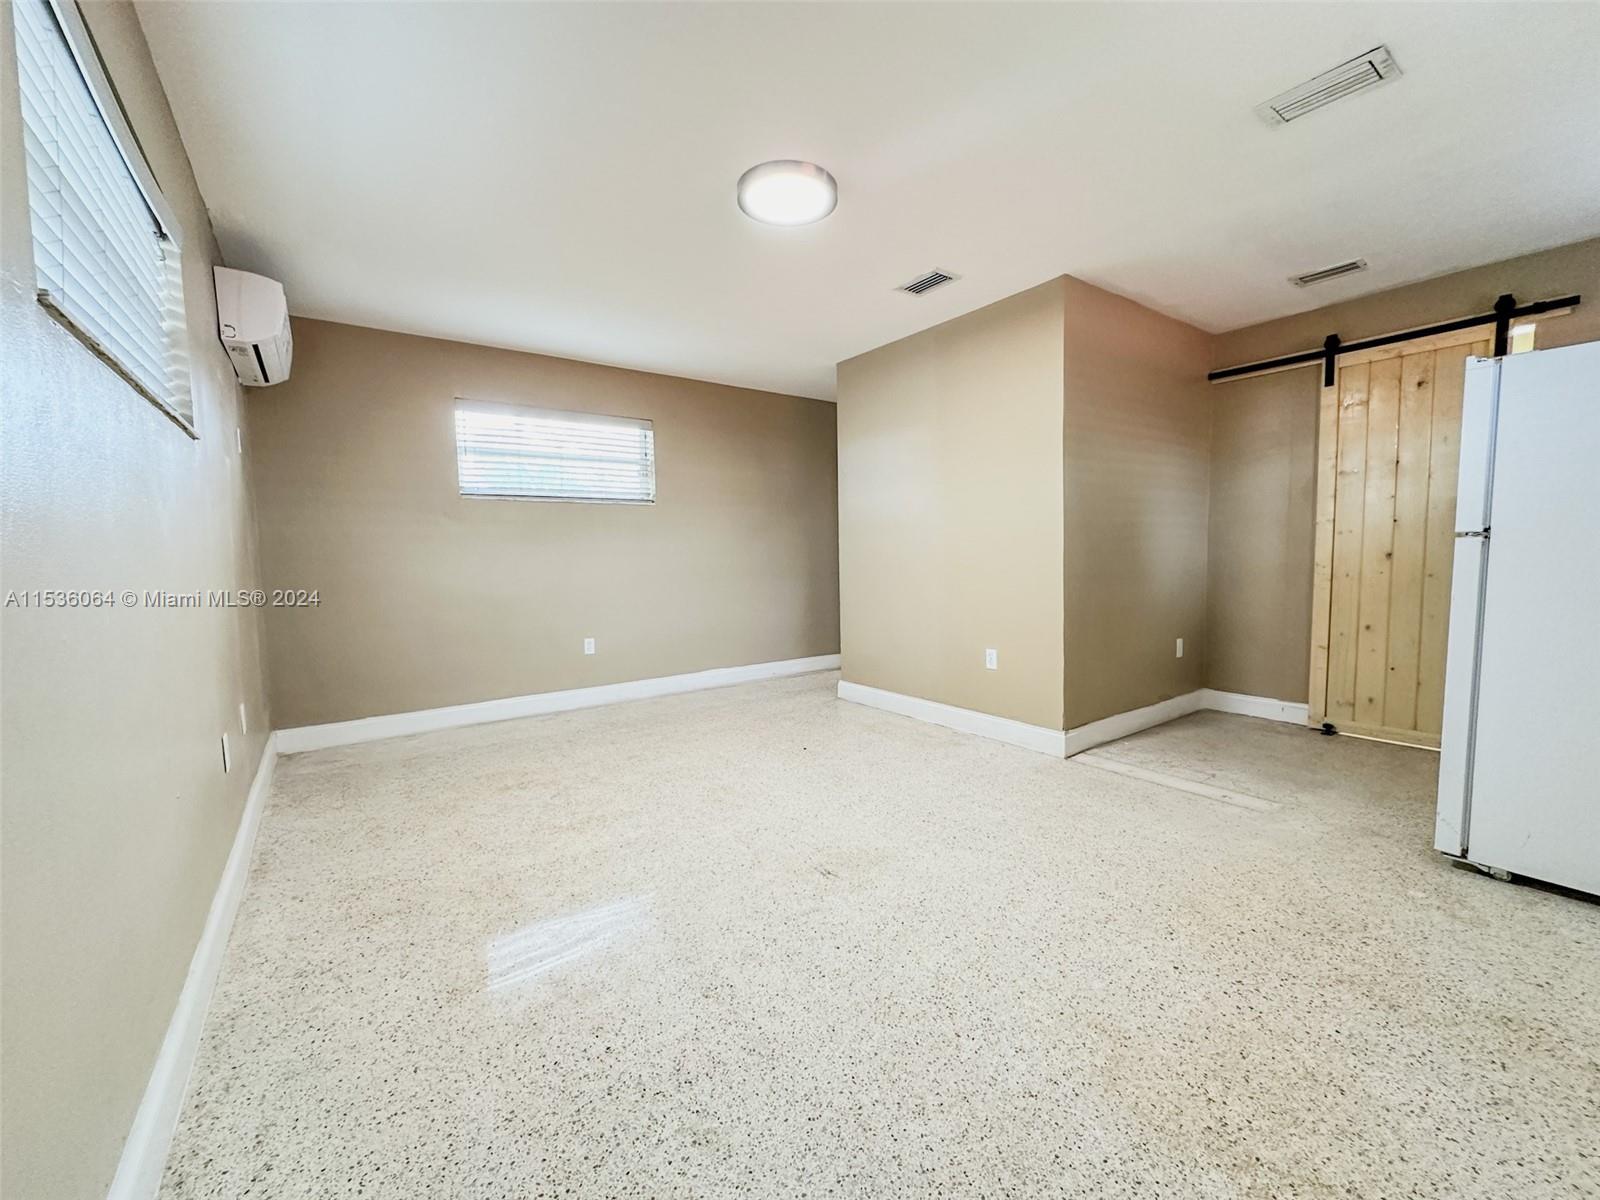 Convenient and centrally located, this spacious studio offers comfort and accessibility in a well-maintained multi-family home. Minutes from hospitals and highways. Additional fee of $125/month for utilities which includes electricity, water, and high-speed internet. Don't miss out on making this your home sweet home! No HOA!